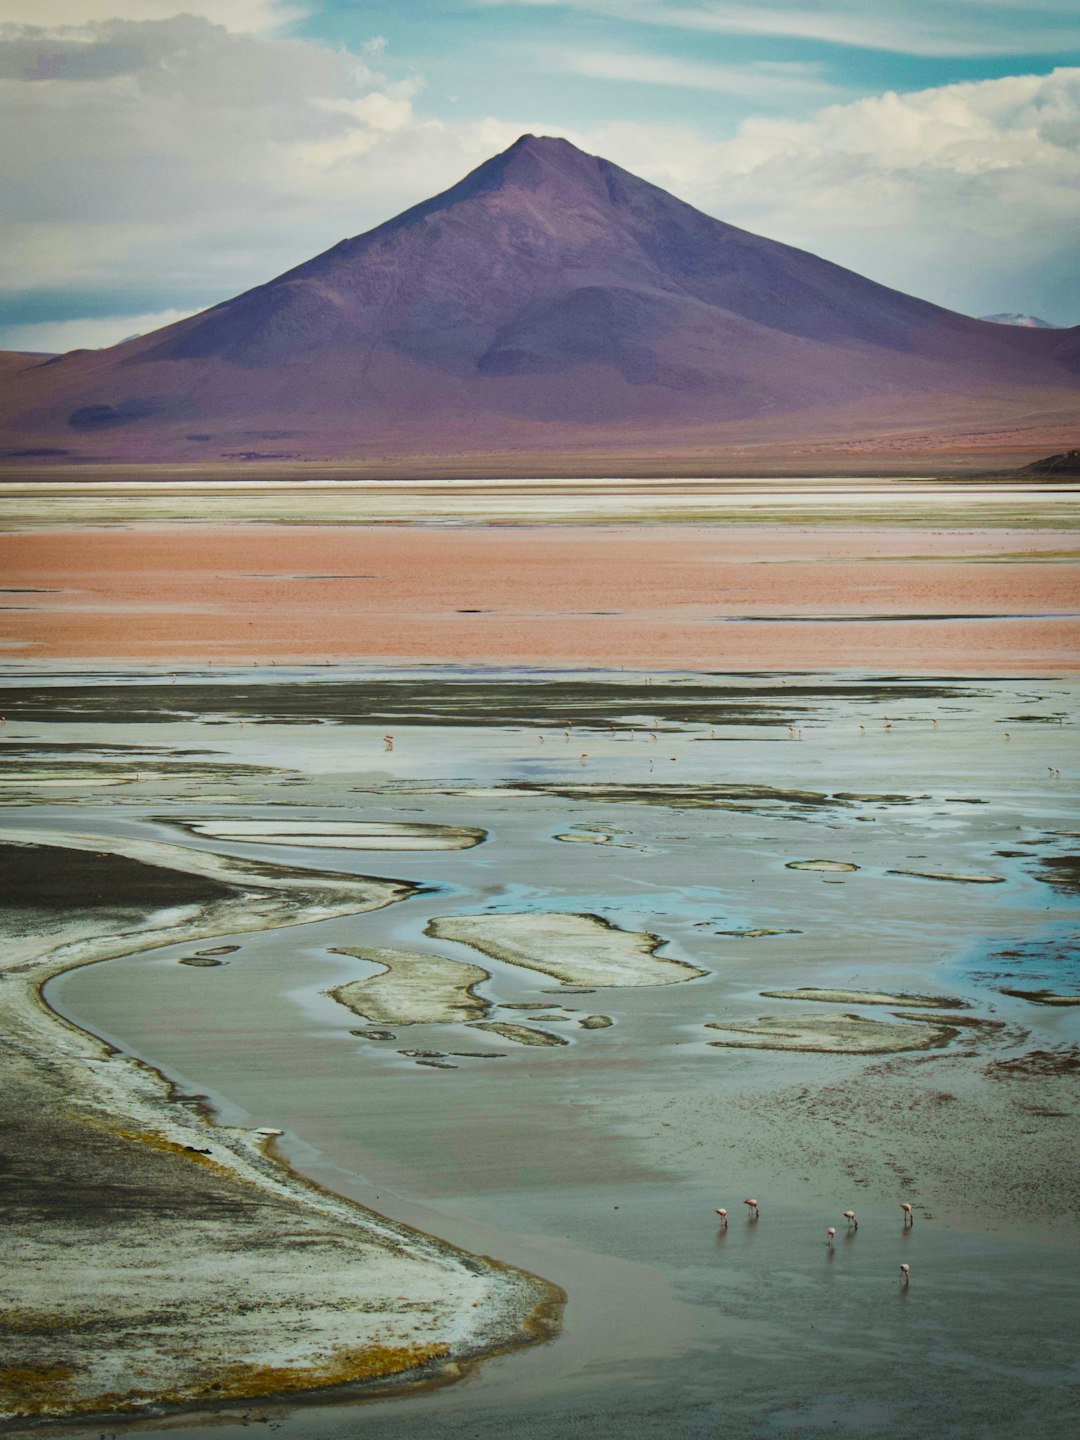 Travel Tips and Stories of Uyuni in Bolivia